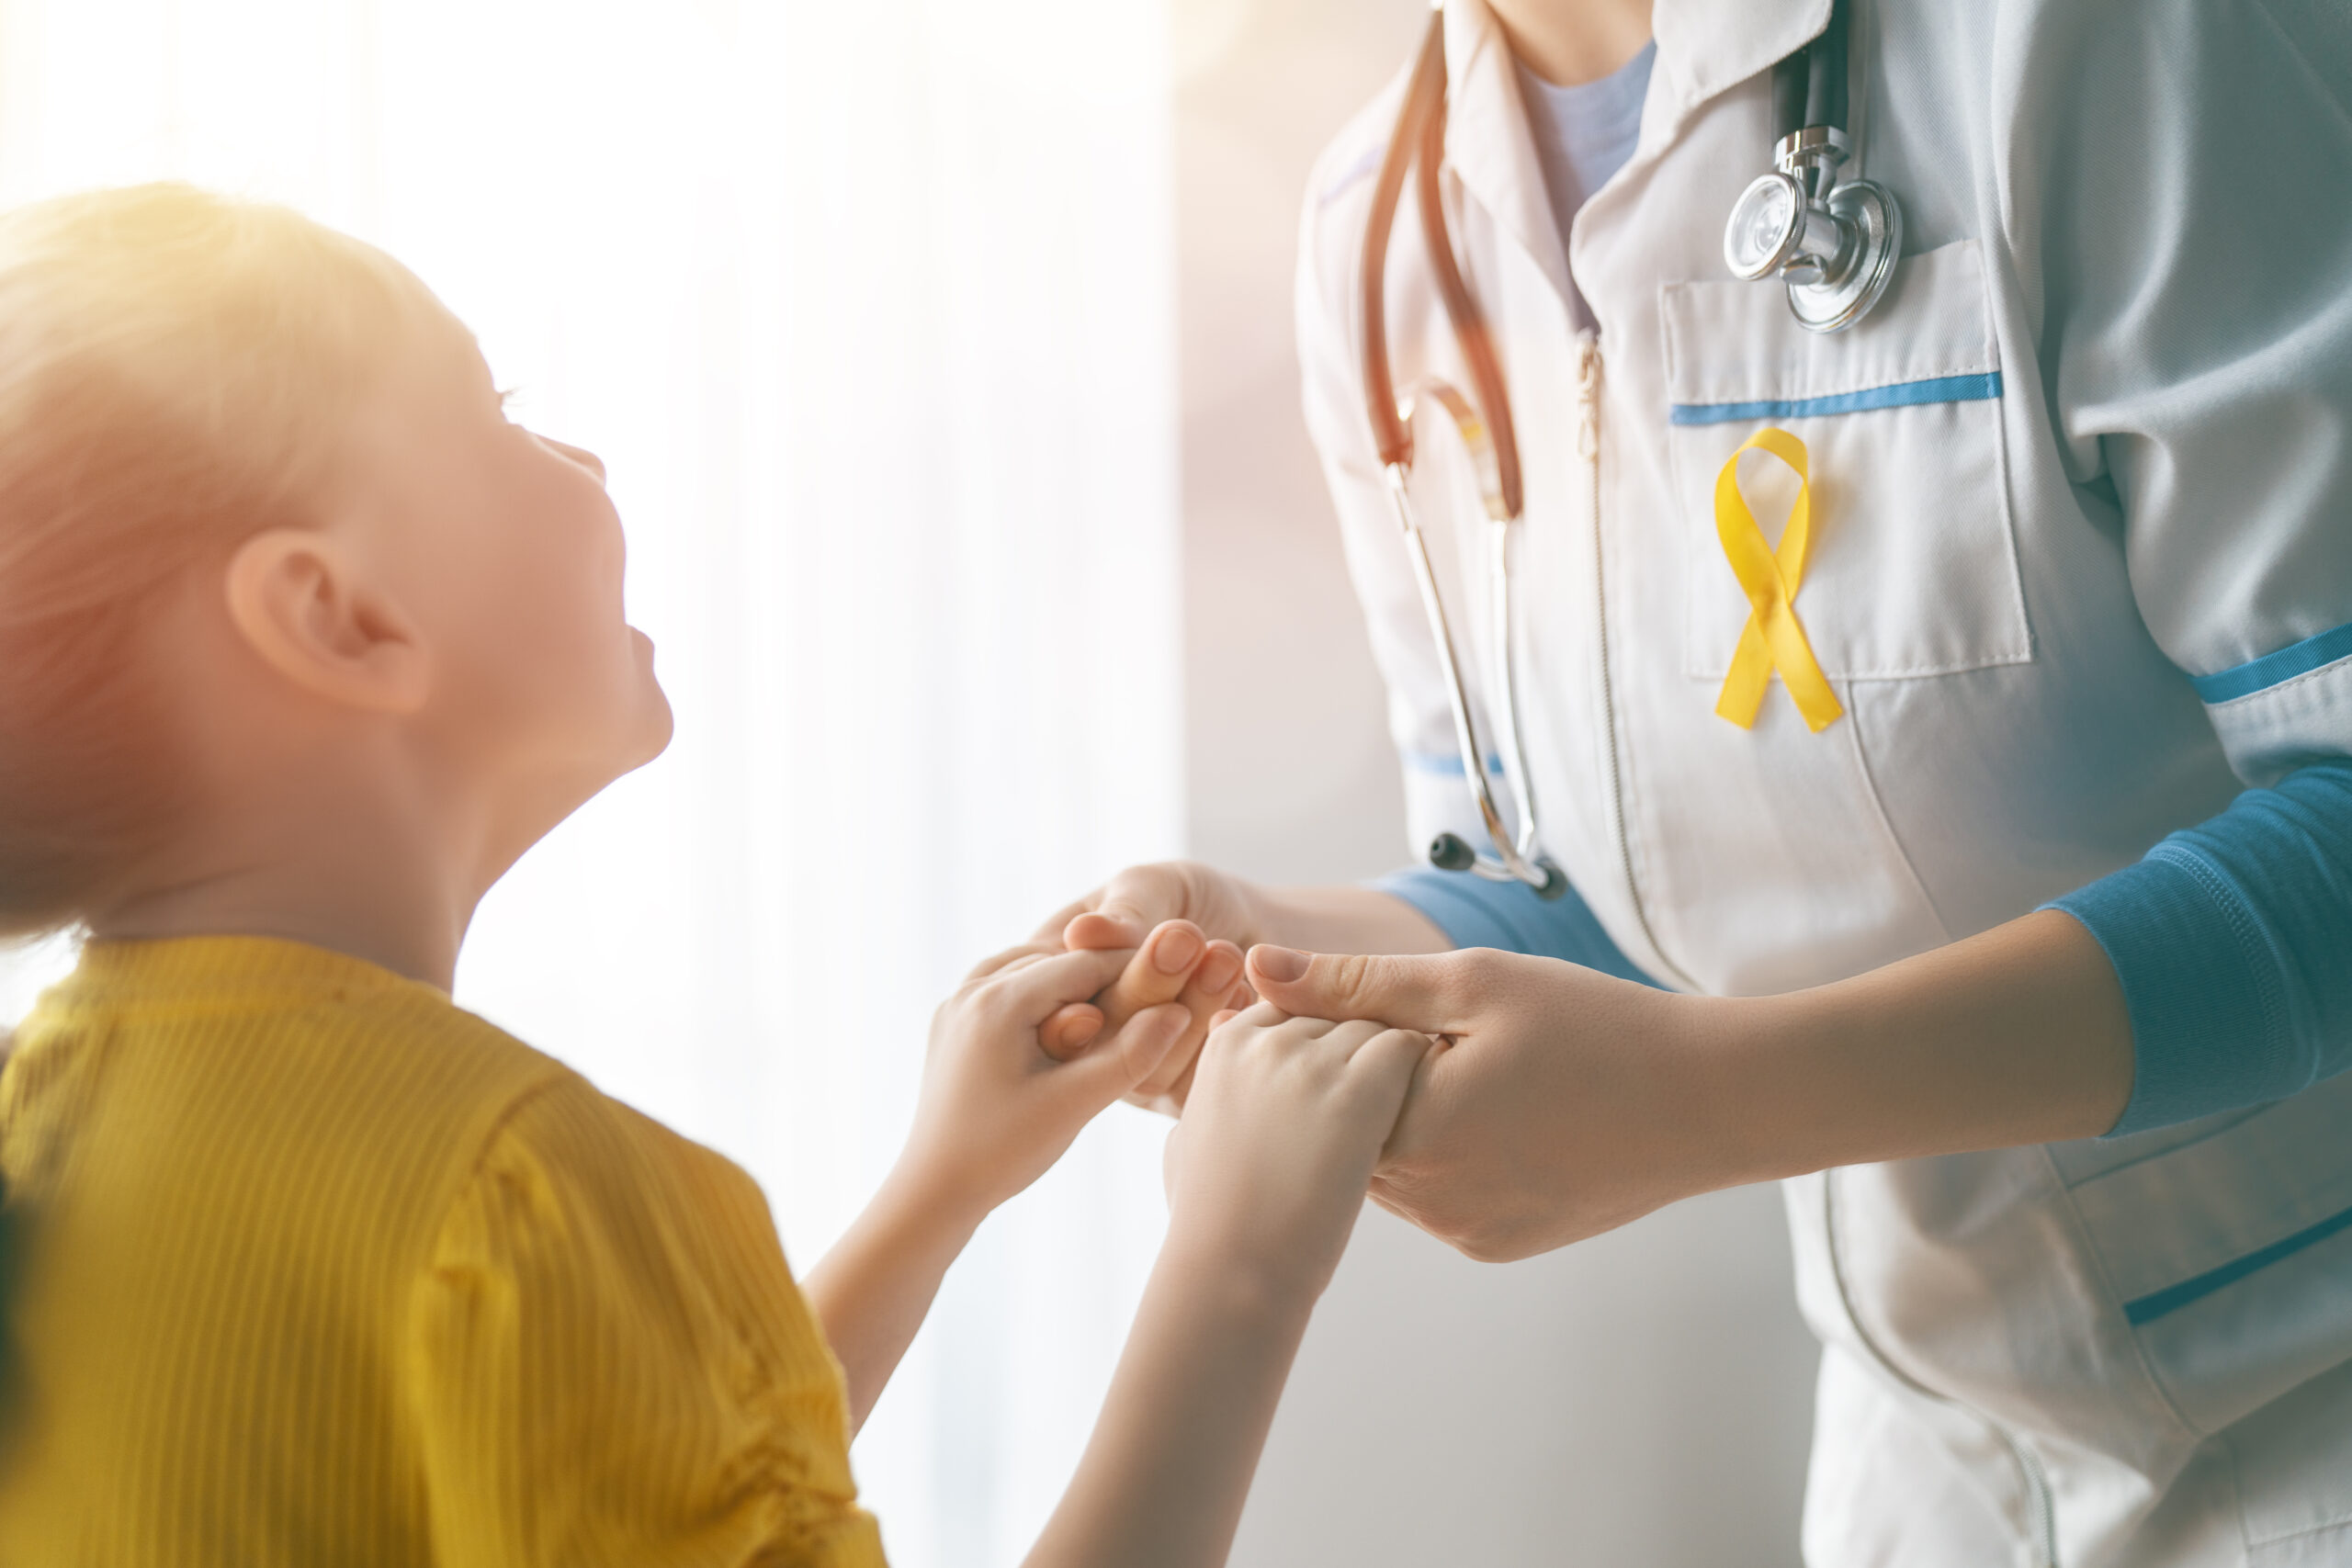 A Potential Drug for Pediatric Cancer Patients